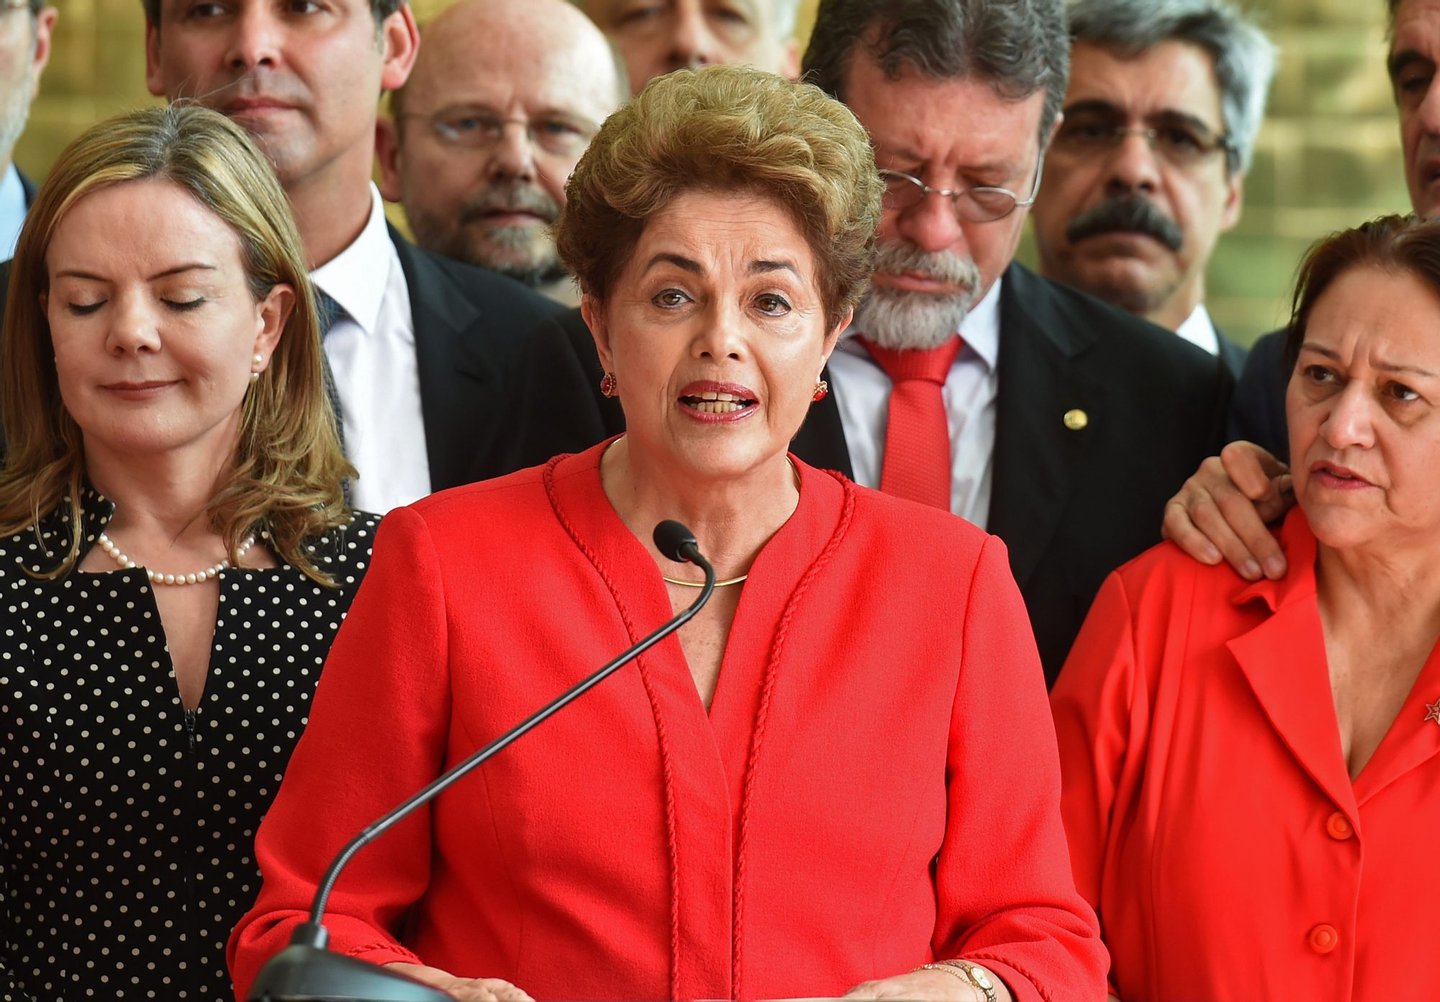 Brazil's former Dilma Rousseff speaks at the Alvorada presidential palace in Brasilia after she was stripped of the country's presidency in a Senate impeachment vote on August 31, 2016. Rousseff was stripped of the country's presidency Wednesday in a Senate impeachment vote ending 13 years of leftist rule in Latin America's biggest economy. Rousseff, 68, was convicted by 61 of the 81 senators of illegally manipulating the national budget. The vote, passing the needed two-thirds majority, meant she was immediately removed from office. / AFP / EVARISTO SA (Photo credit should read EVARISTO SA/AFP/Getty Images)